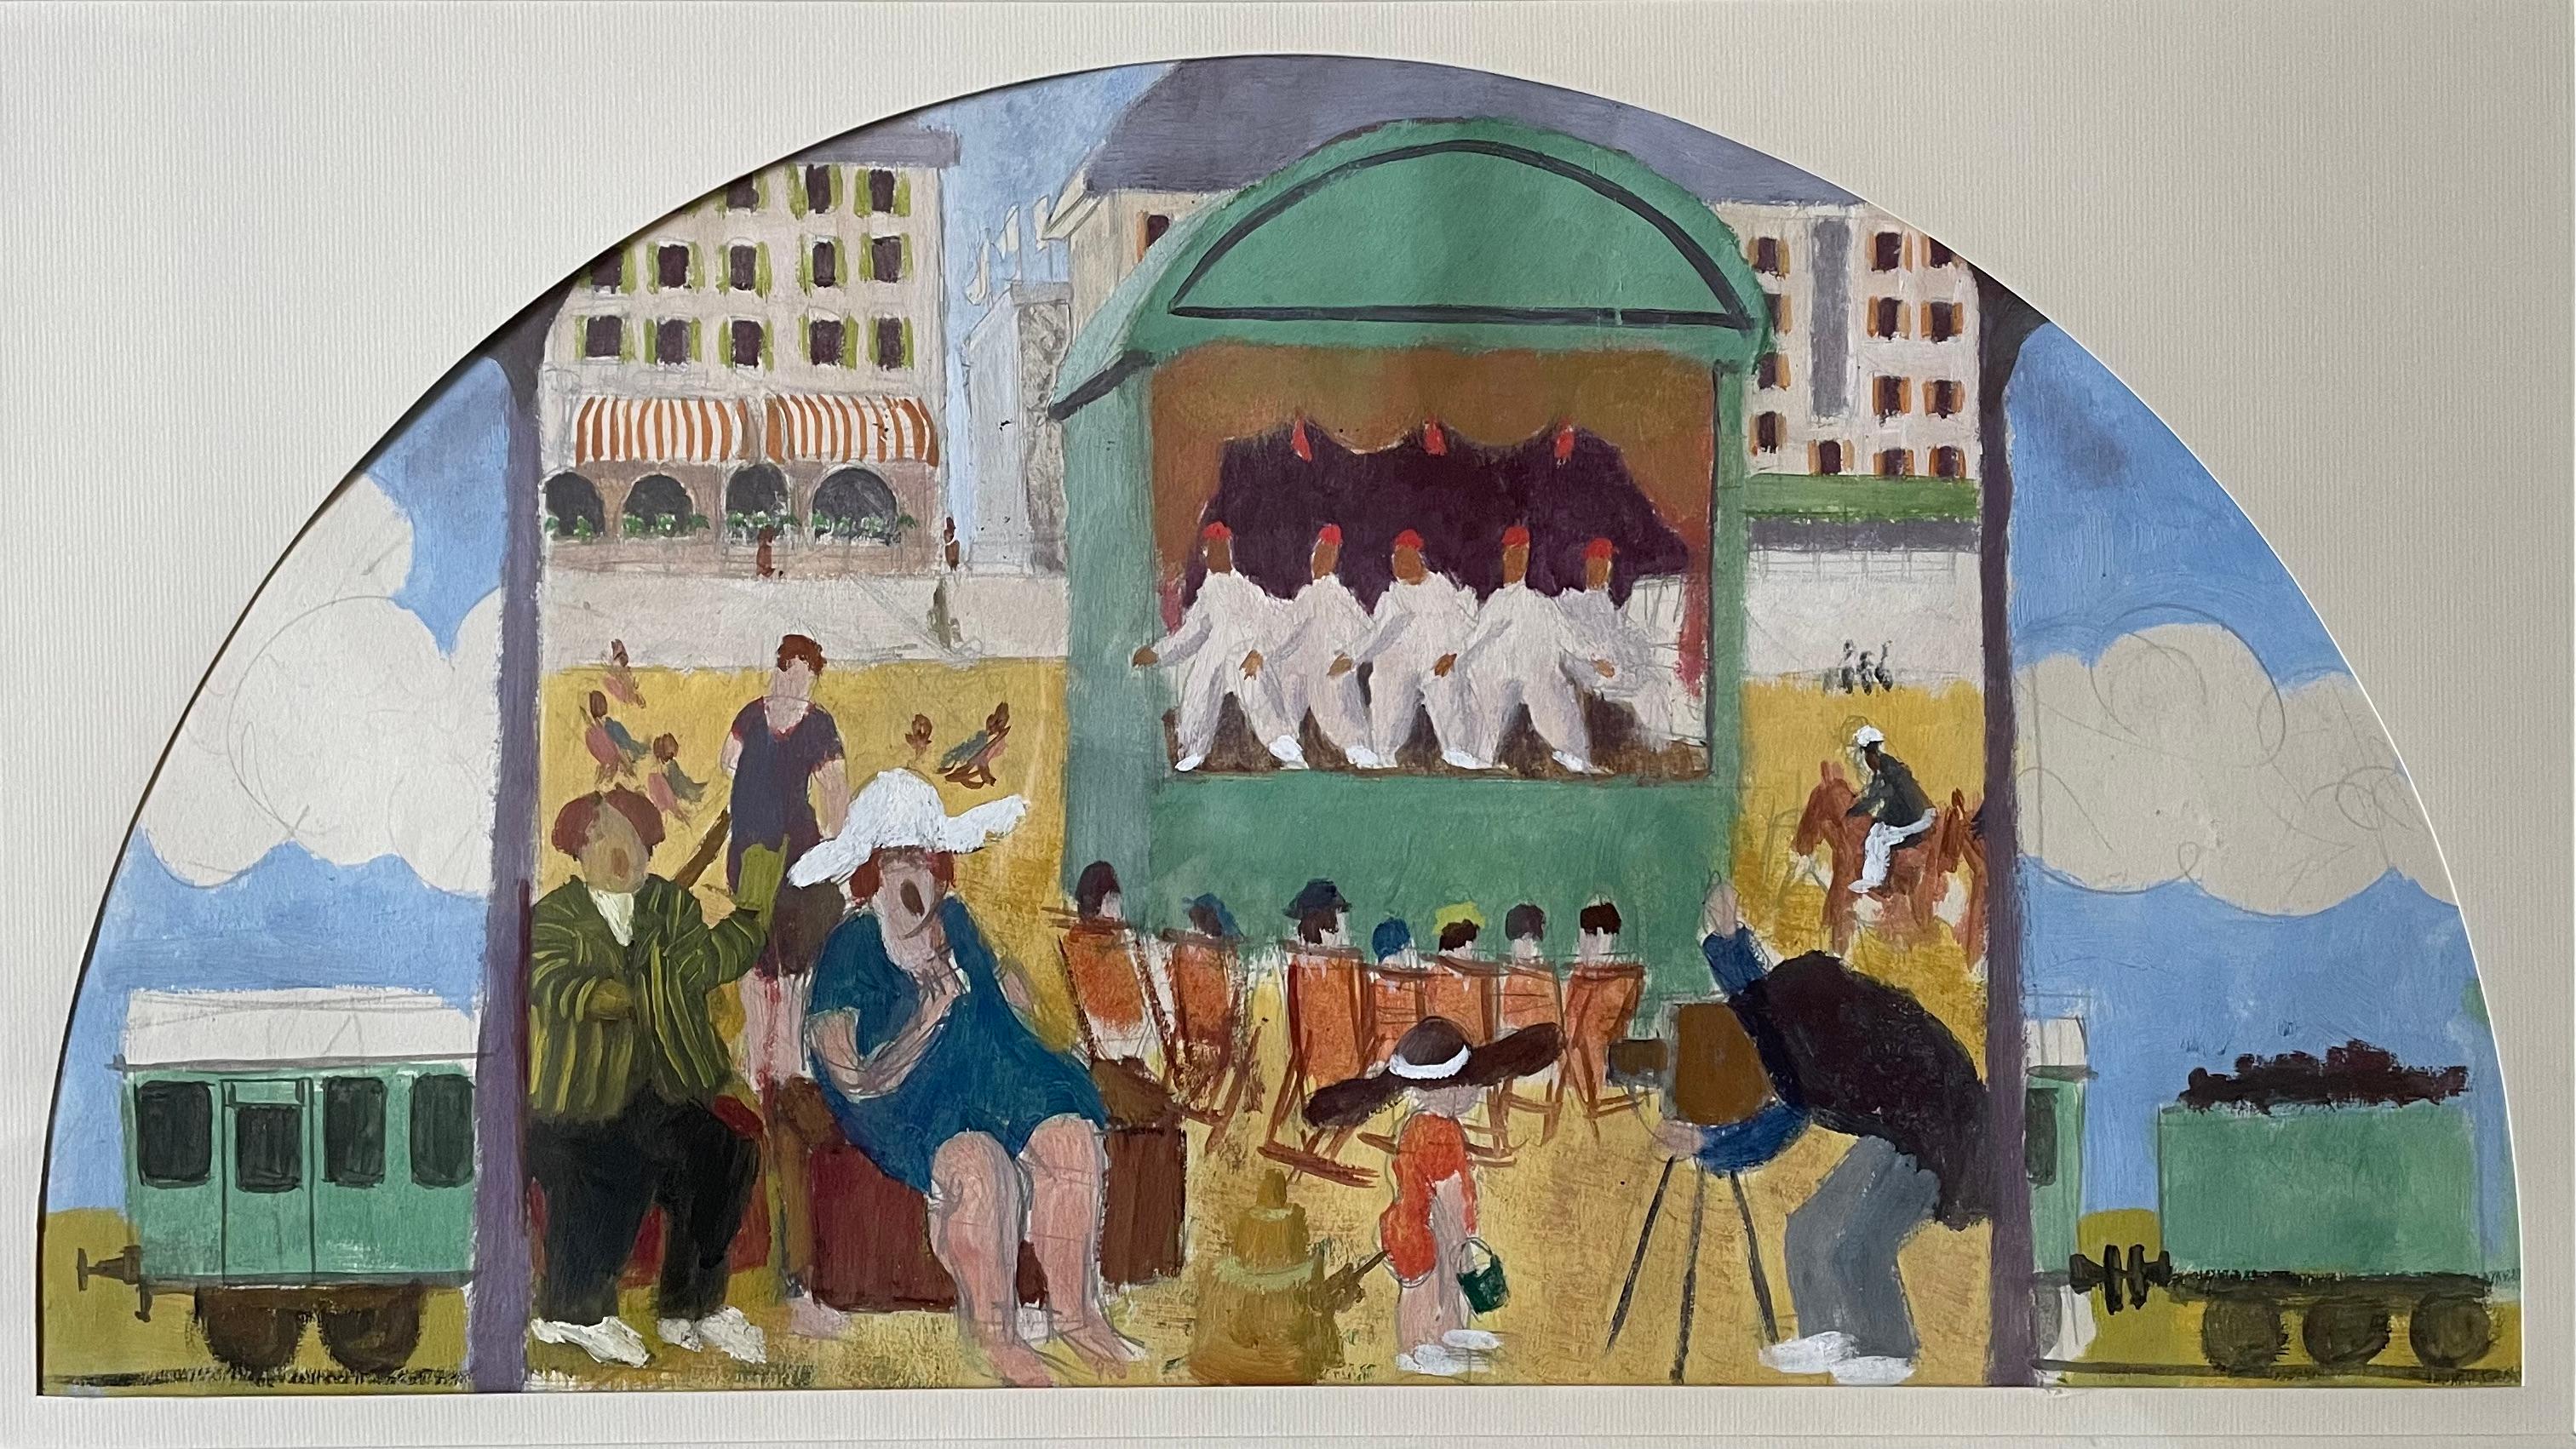 GERALD MACKENZIE LEET
(BRITISH 1913-1998)

A Day at the Seaside – Design for a Mural

Watercolour and gouache over pencil, arched top
Framed

26.5 by 49.5 cm., 10 ½ by 19 ½ in.
(frame size 47.5 by 69.5 cm., 18 ¾ by 27 ½ in.)

Provenance:
The